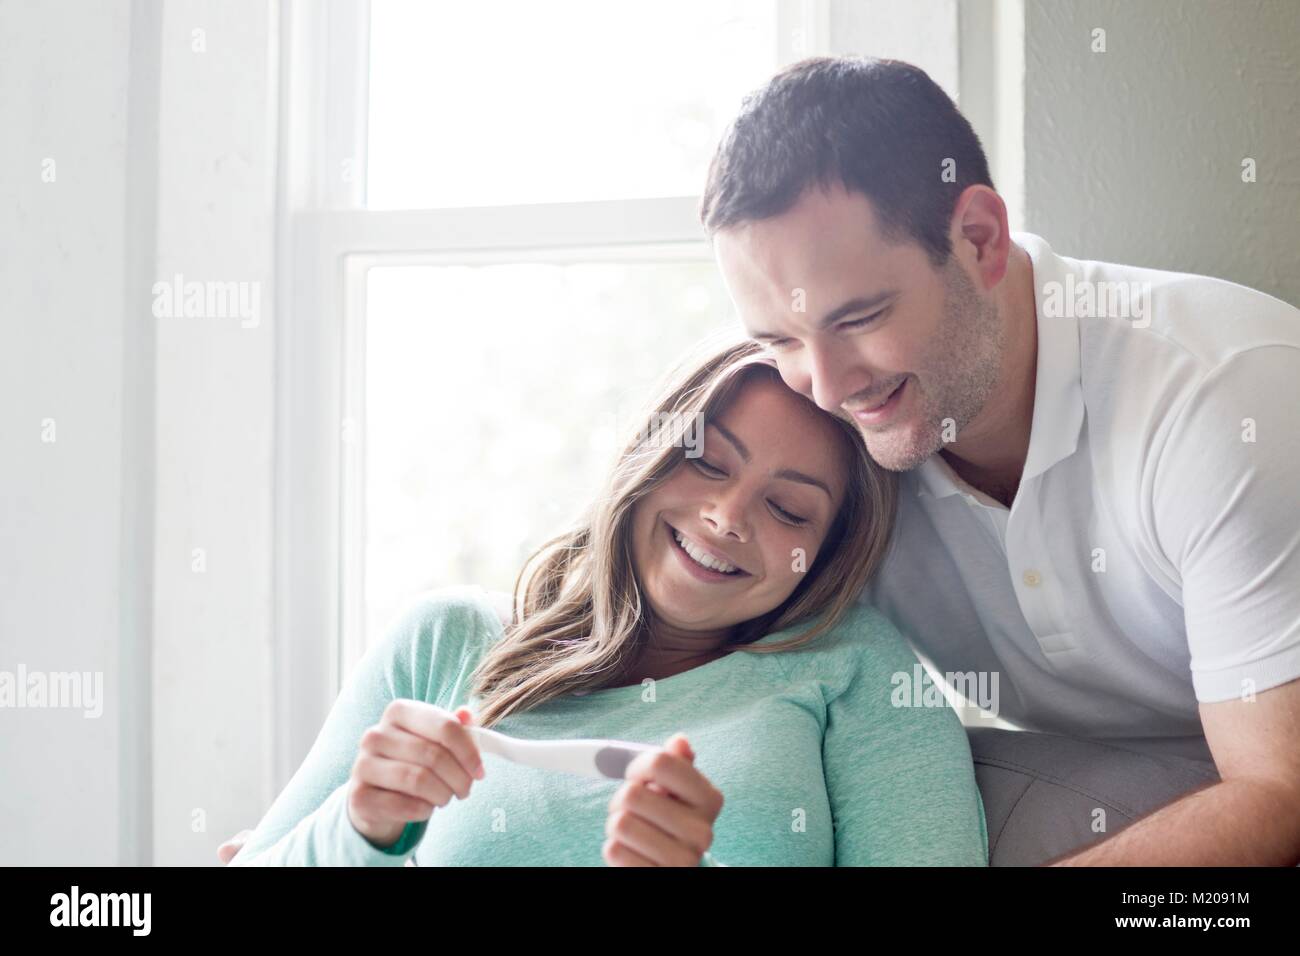 Couple looking at pregnancy test. Stock Photo